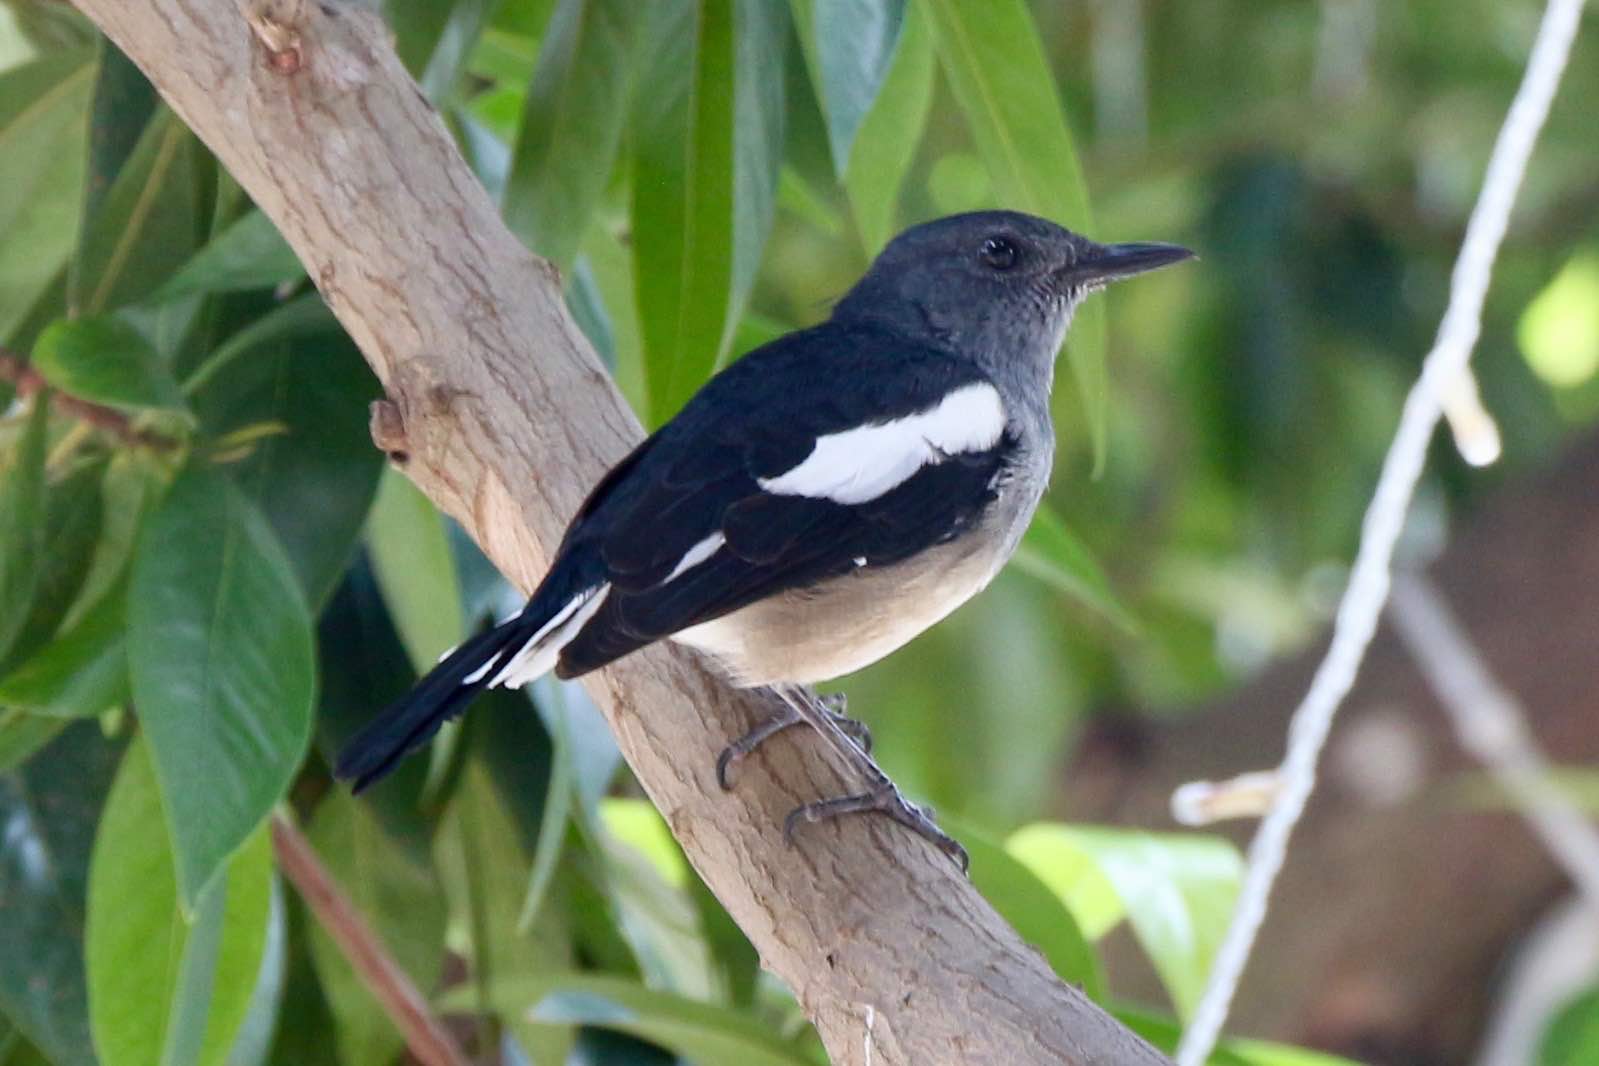 A cute round oriental magpie-robin, with a grey head, a buff body and black wings with bright white bars. It is perched on a branch.
